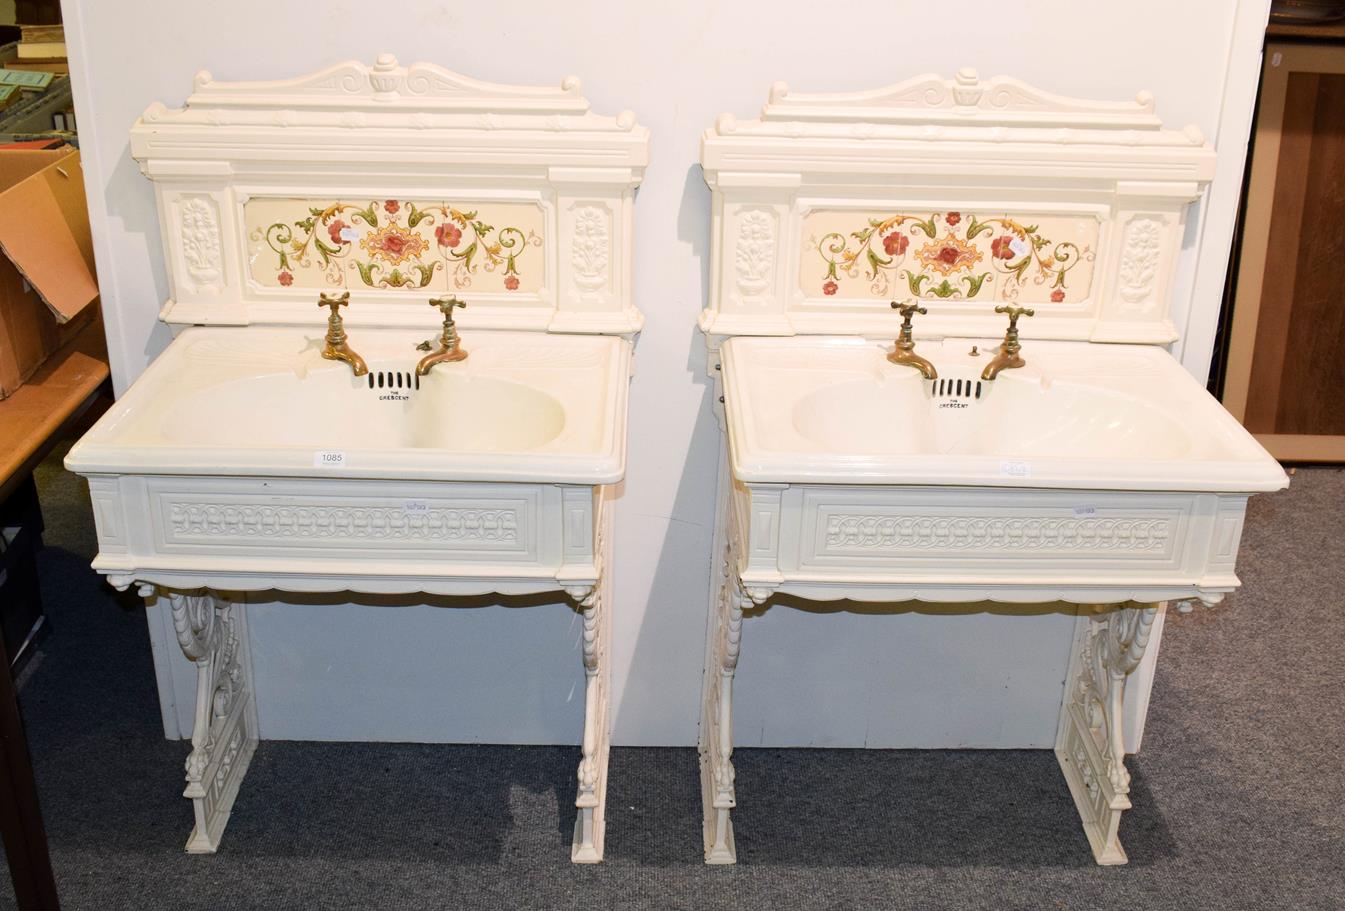 Lot 1085 - A pair of Victorian ladies and gents wash basins on painted cast iron stands with tiles...